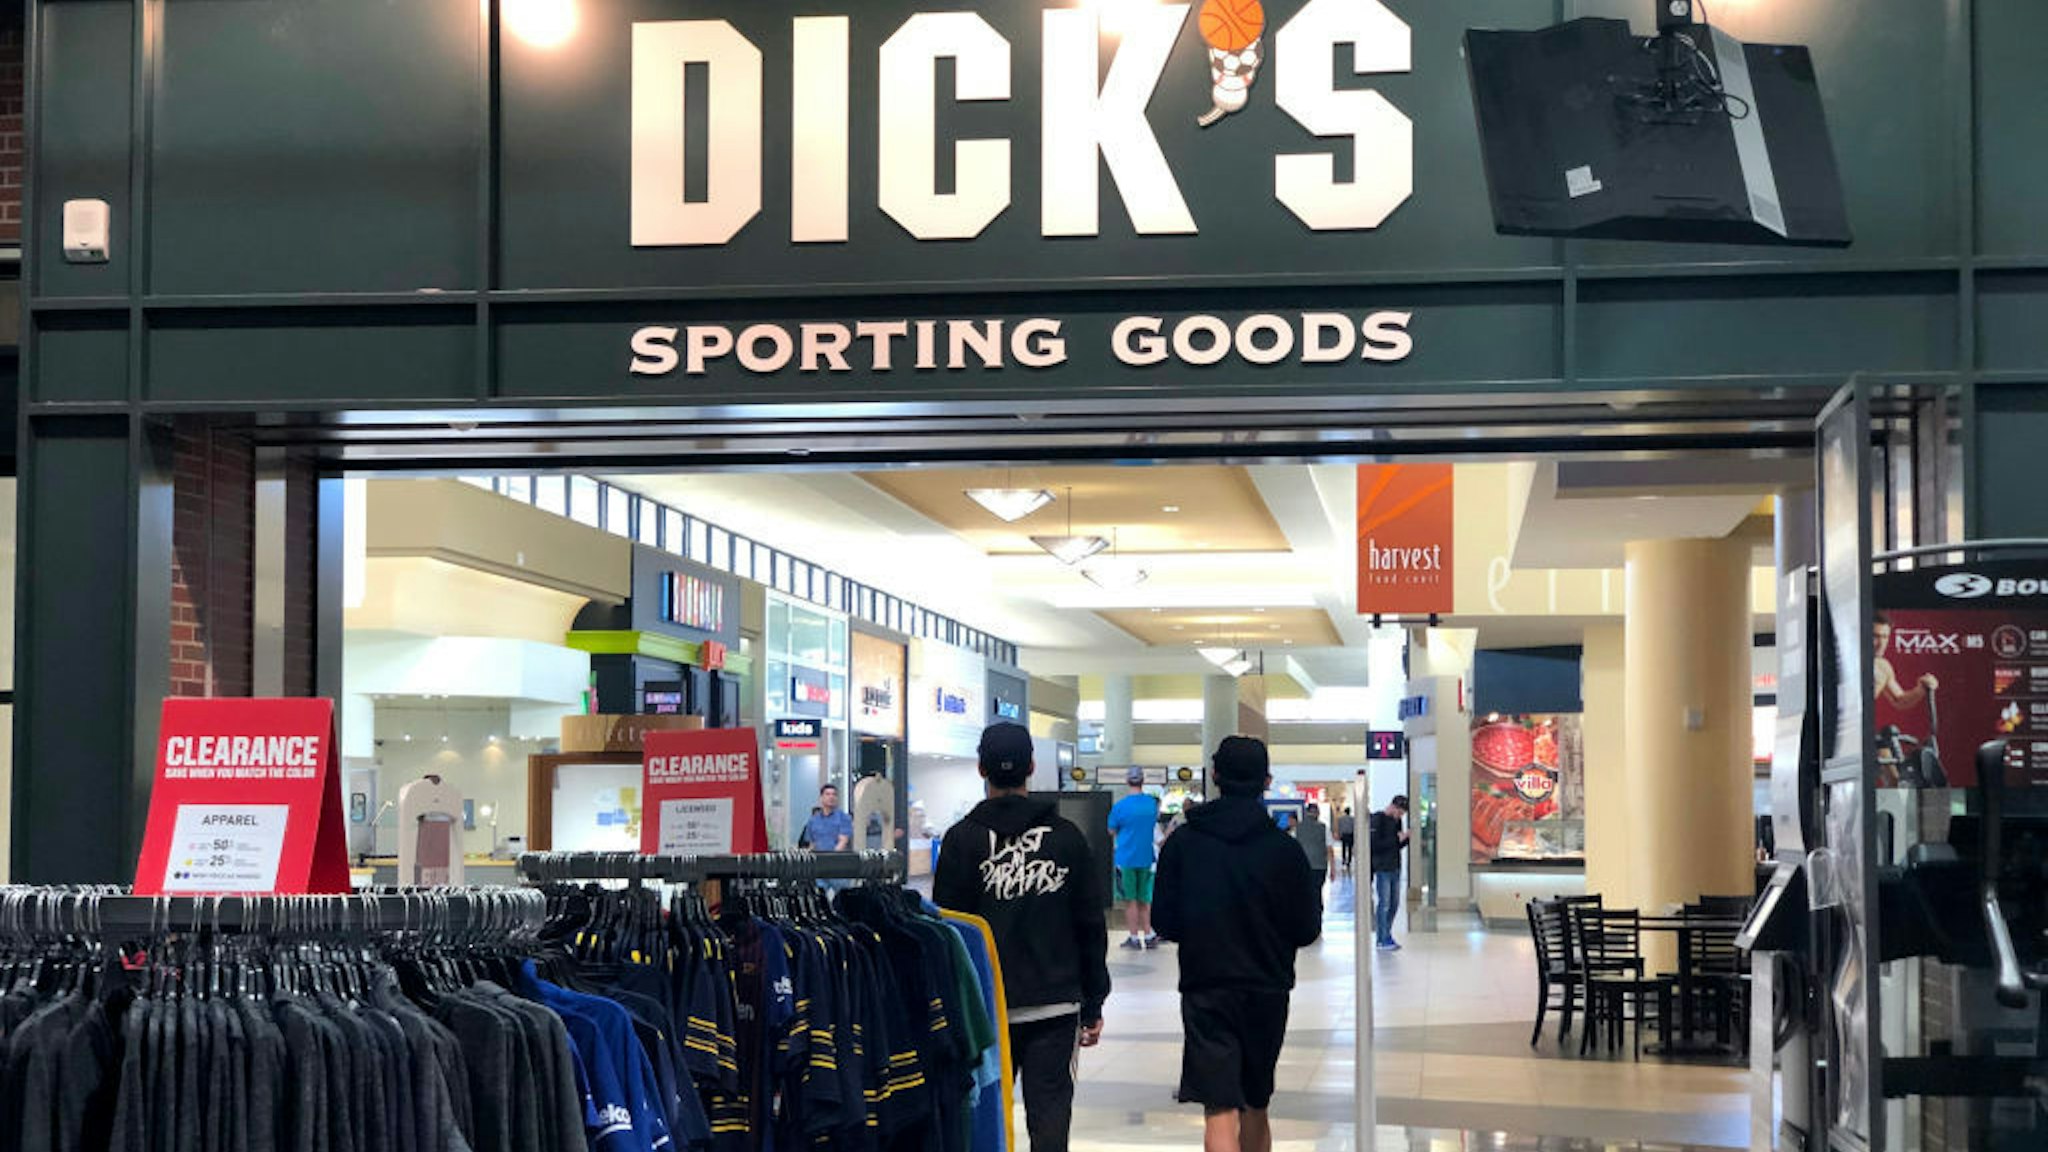 Customers leave a Dick's Sporting Goods store on May 29, 2019 in Daly City, California. Shares of Dick's Sporting Goods stock surged on Wednesday after the company reported better-than-expected first quarter earnings and raised its full year outlook. The sporting goods retailer announced that it expects to earn from $3.20 to $3.40 a share, compared to its estimate of $3.15 to $3.35 per share. (Photo by Justin Sullivan/Getty Images)